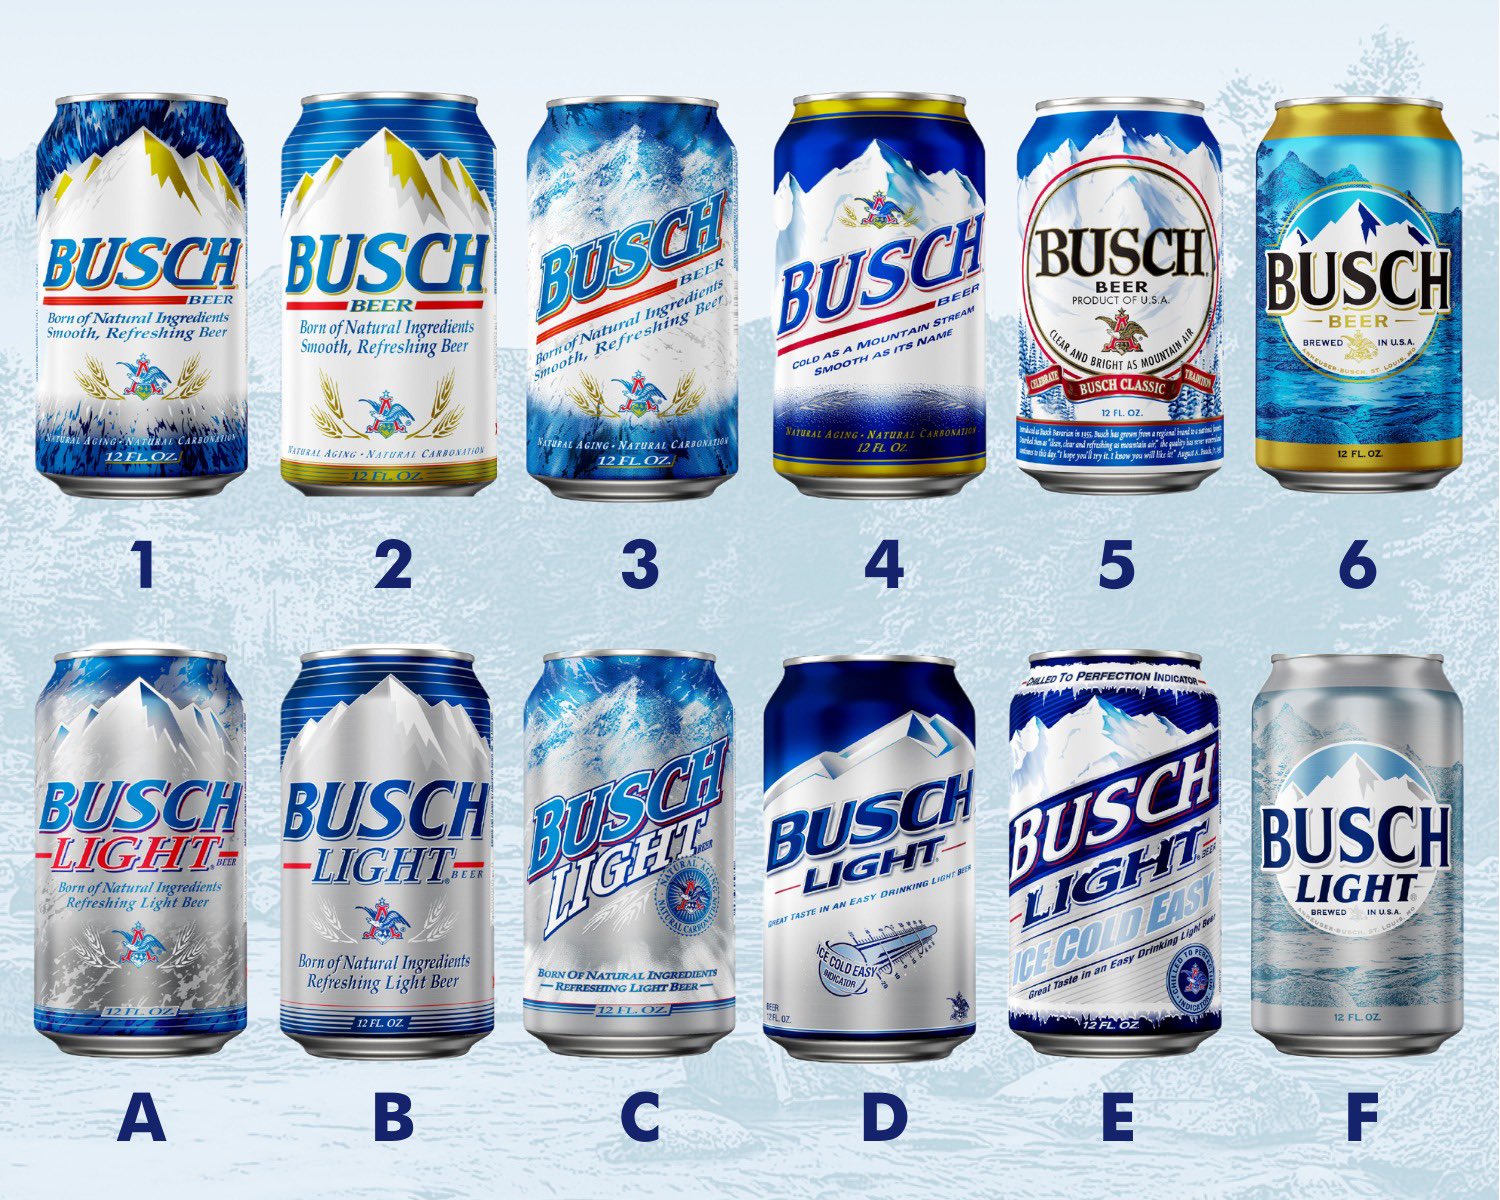 Busch Beer on X: This #BeerCanAppreciationDay, we're taking a